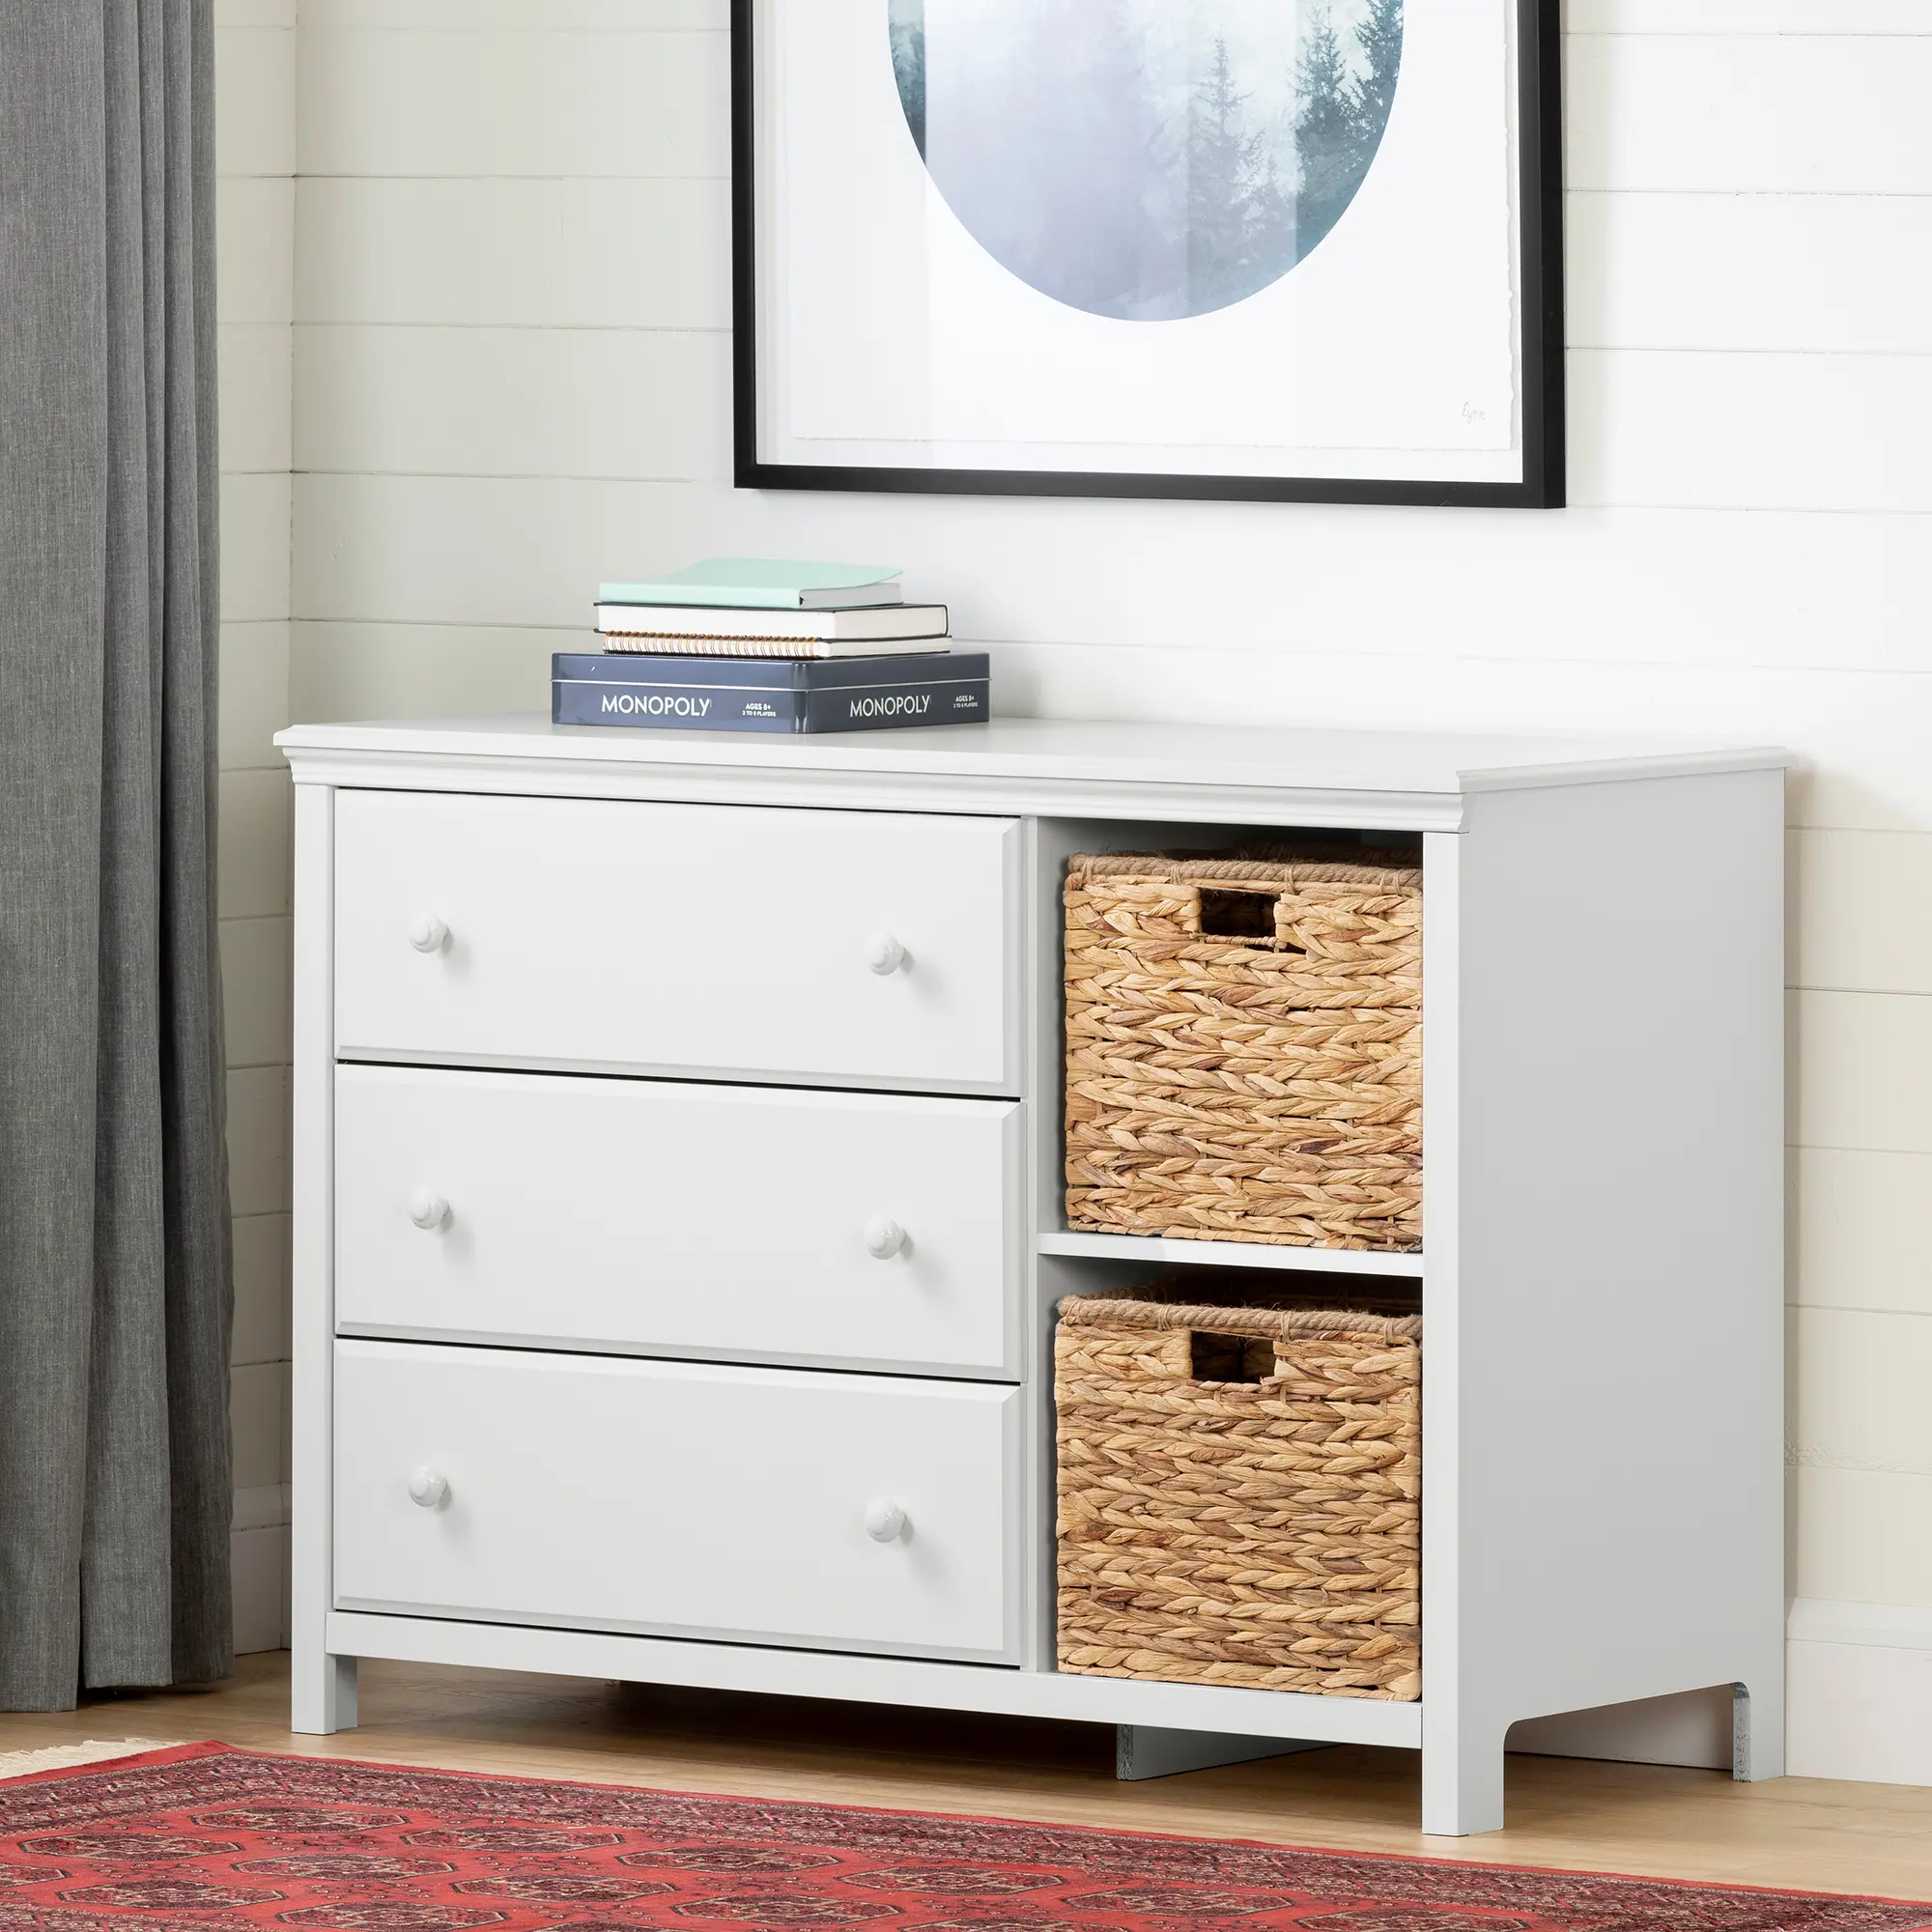 12140 Cotton Candy White 3 Drawer Dresser with Baskets - sku 12140